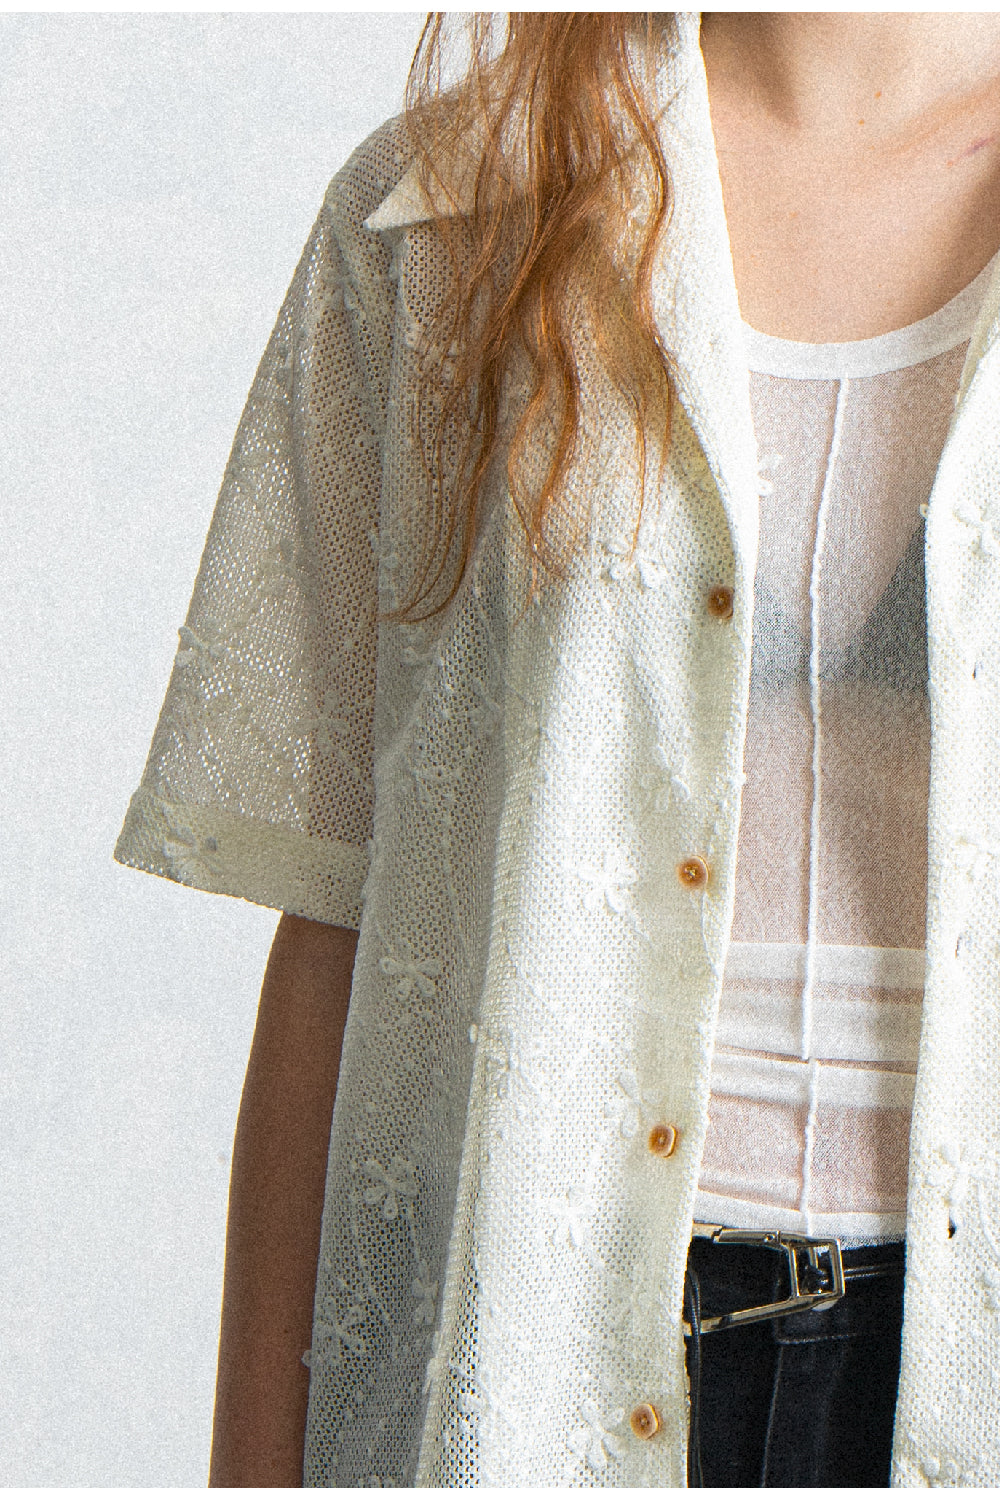 Lace Hollow Floral Pattern Shirt